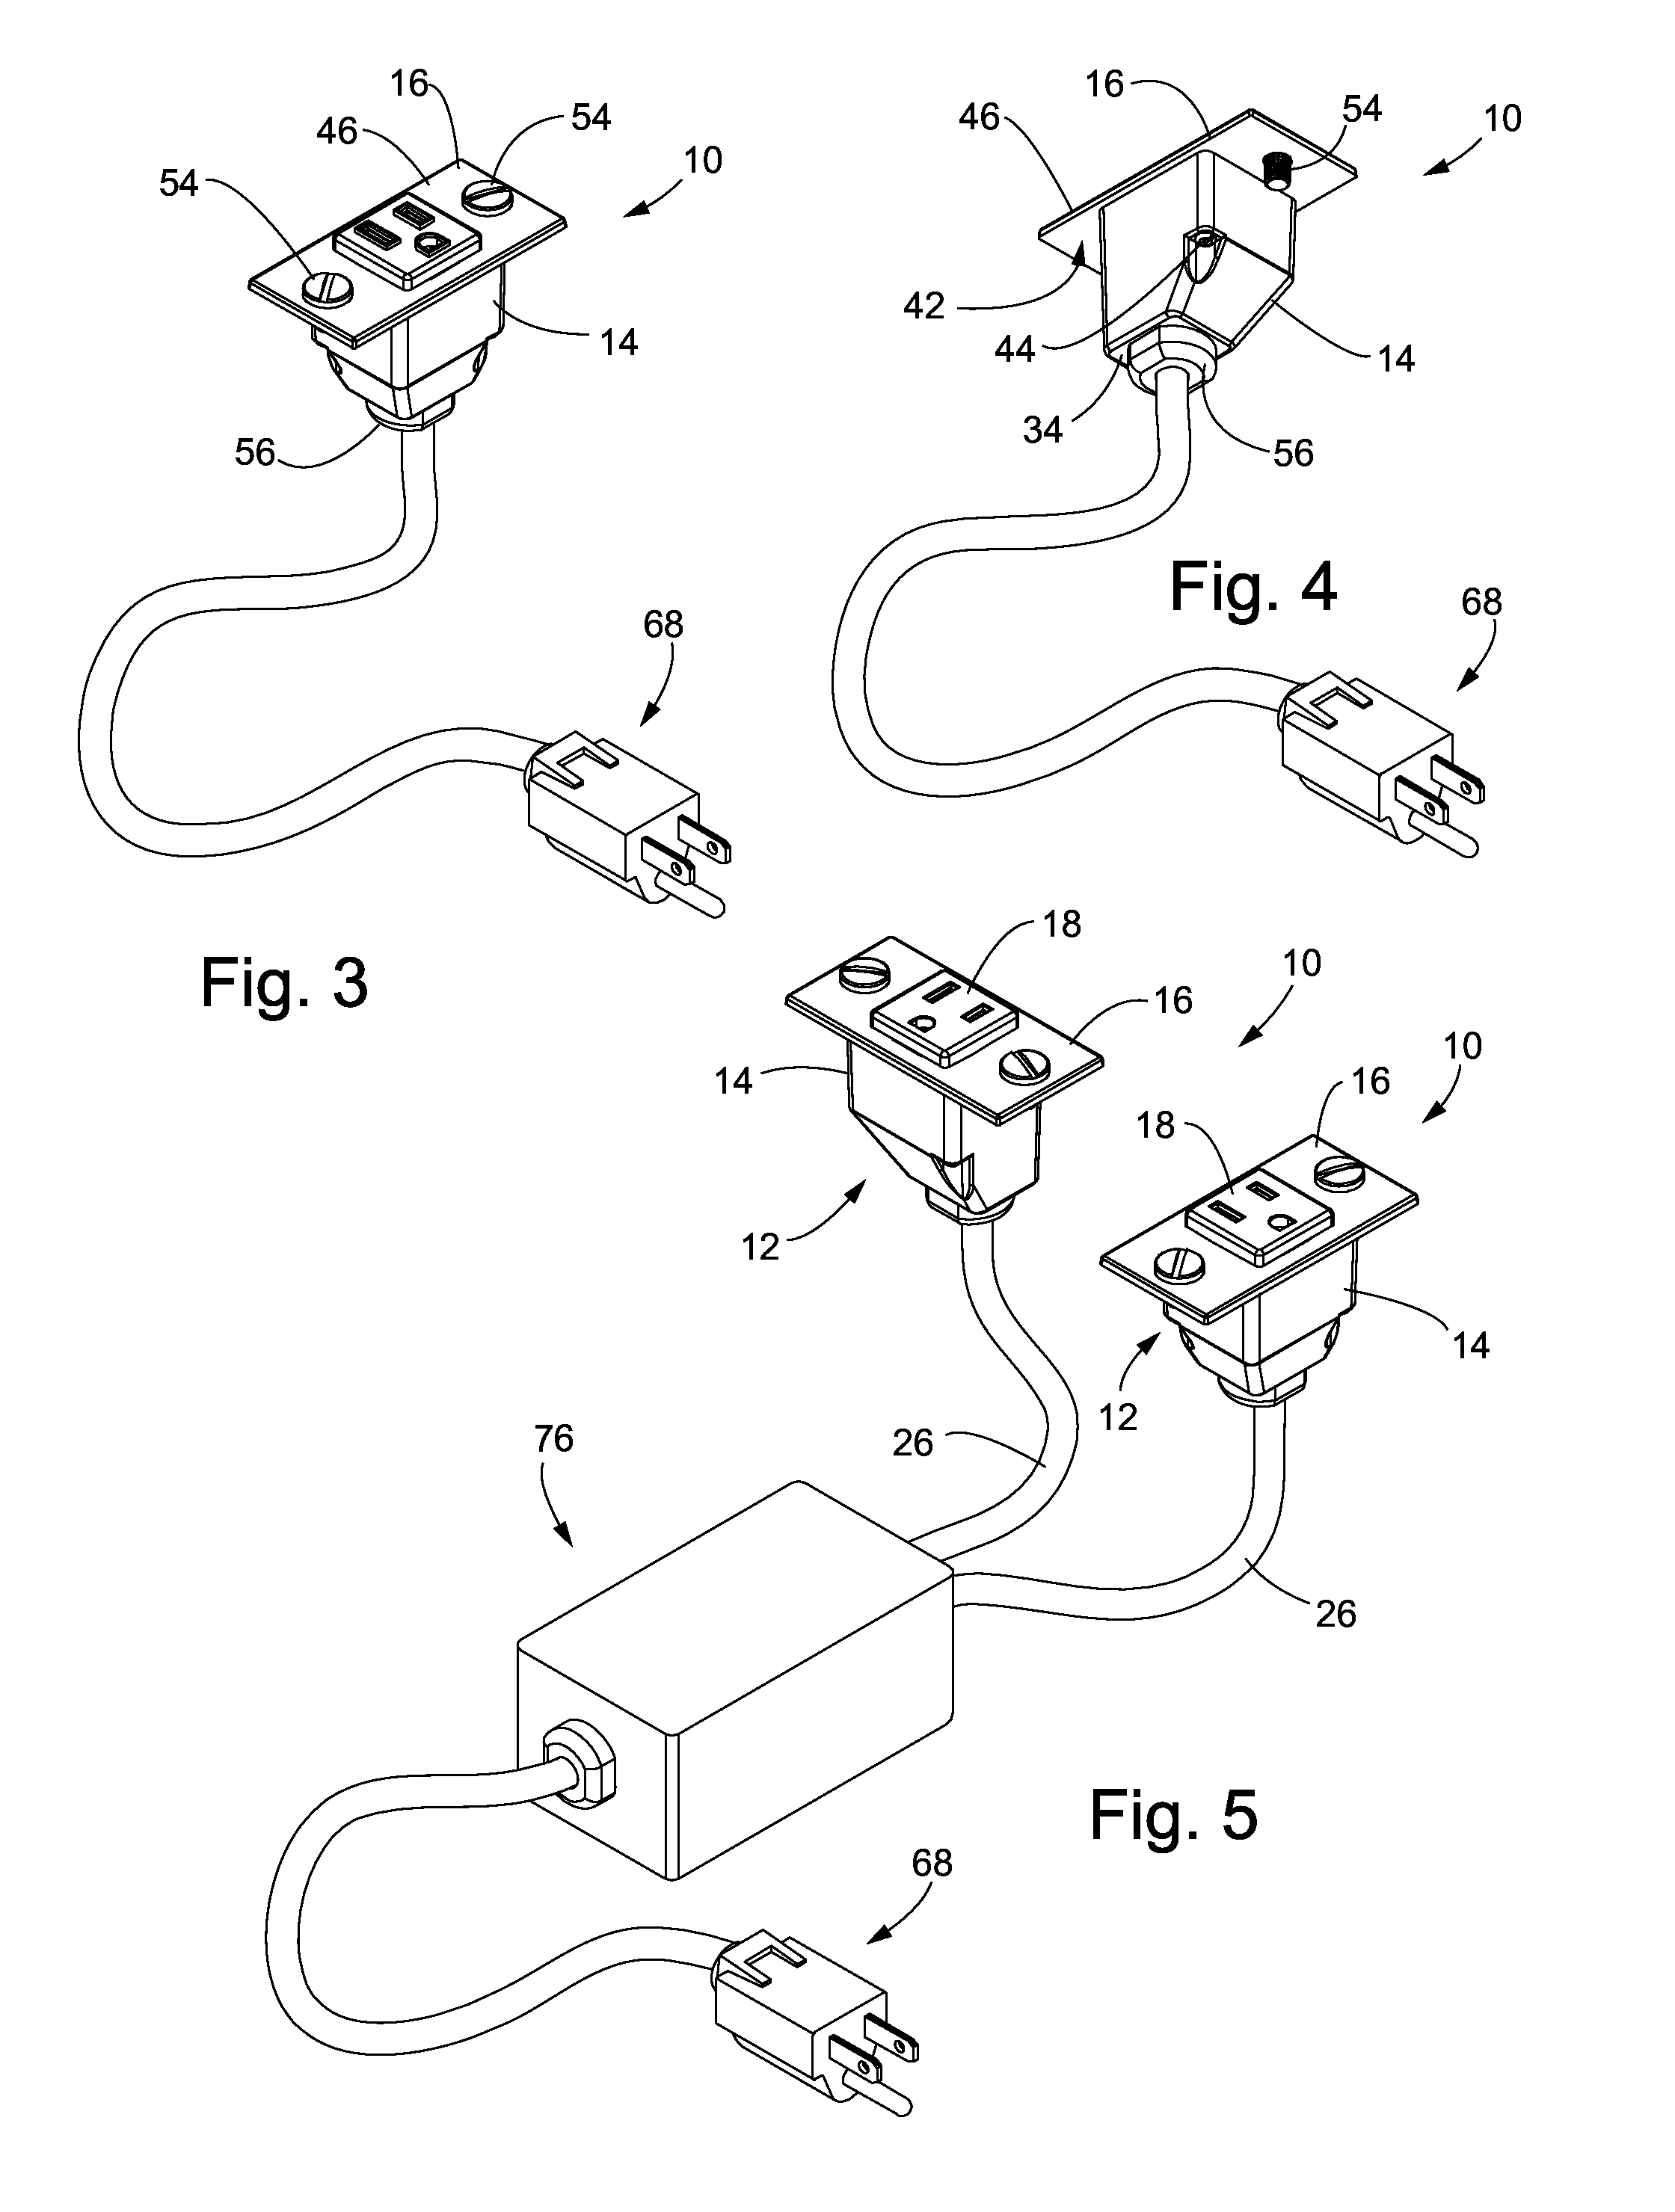 Electrical receptacle assembly with housing